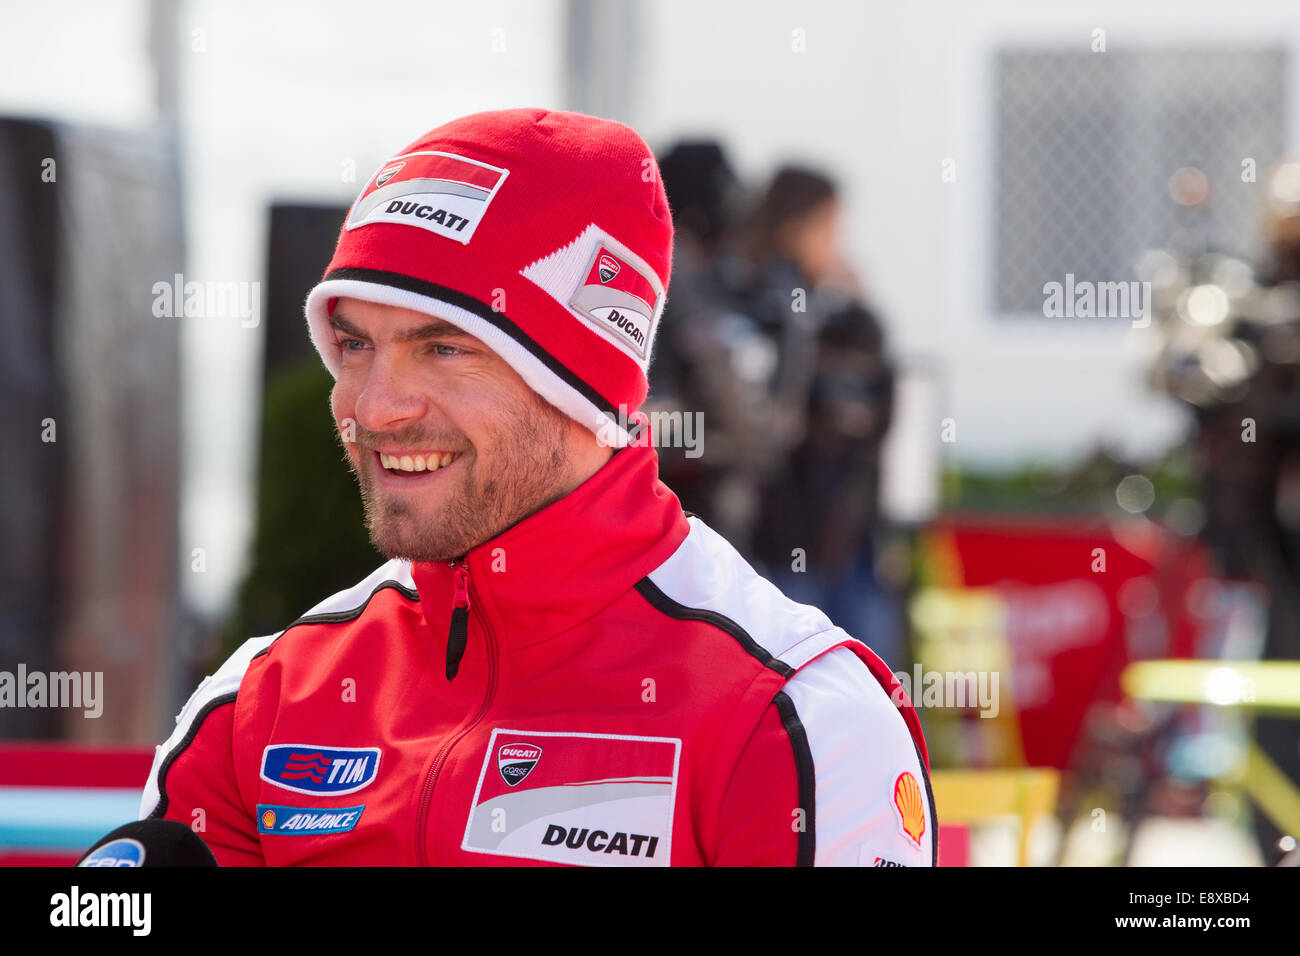 Phillip Island, Australia. Thursday, 16 October, 2014. British rider Cal Crutchlow speaks to the press prior to the start of the Australian Grand Prix. Crutchlow rides for the Team Ducati MotoGP Team. Credit:  Russell Hunter/Alamy Live News Stock Photo